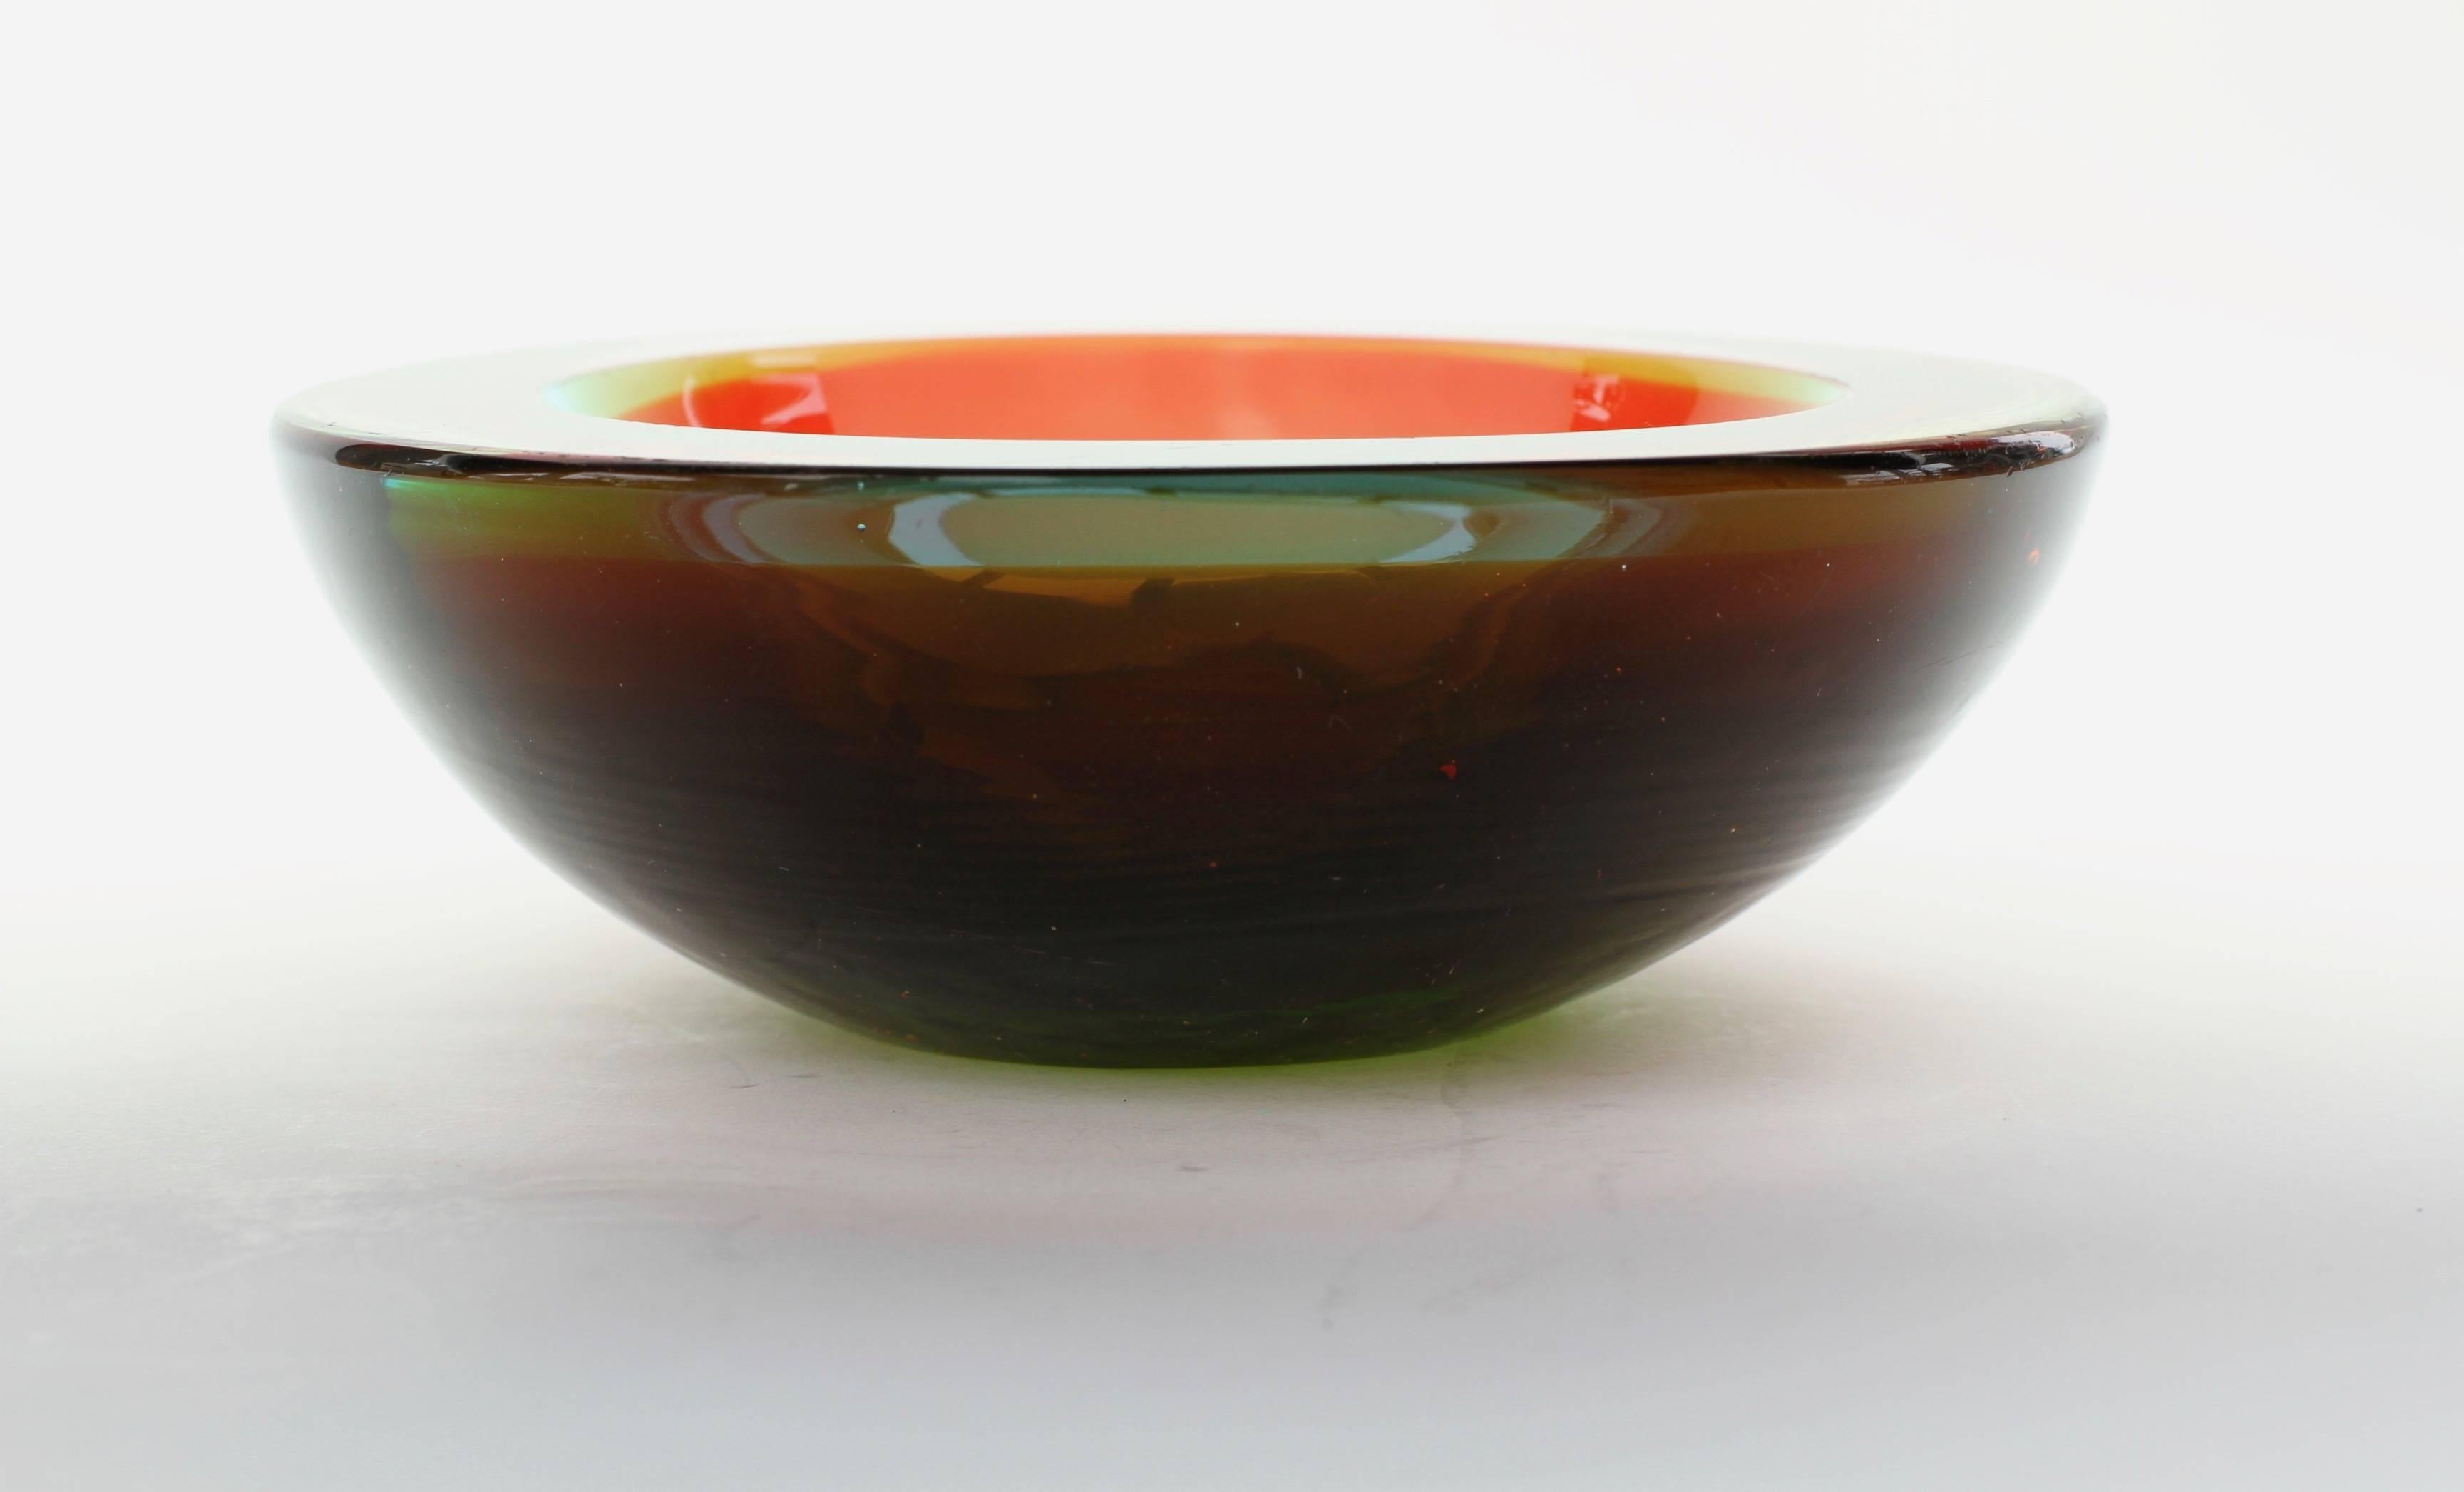 Gorgeous little Murano glass 'Geode' bowl by an unknown maker, circa 1960-1969. The colors are quite delightful with hues of green, burnt orange, sky blue and lilac.